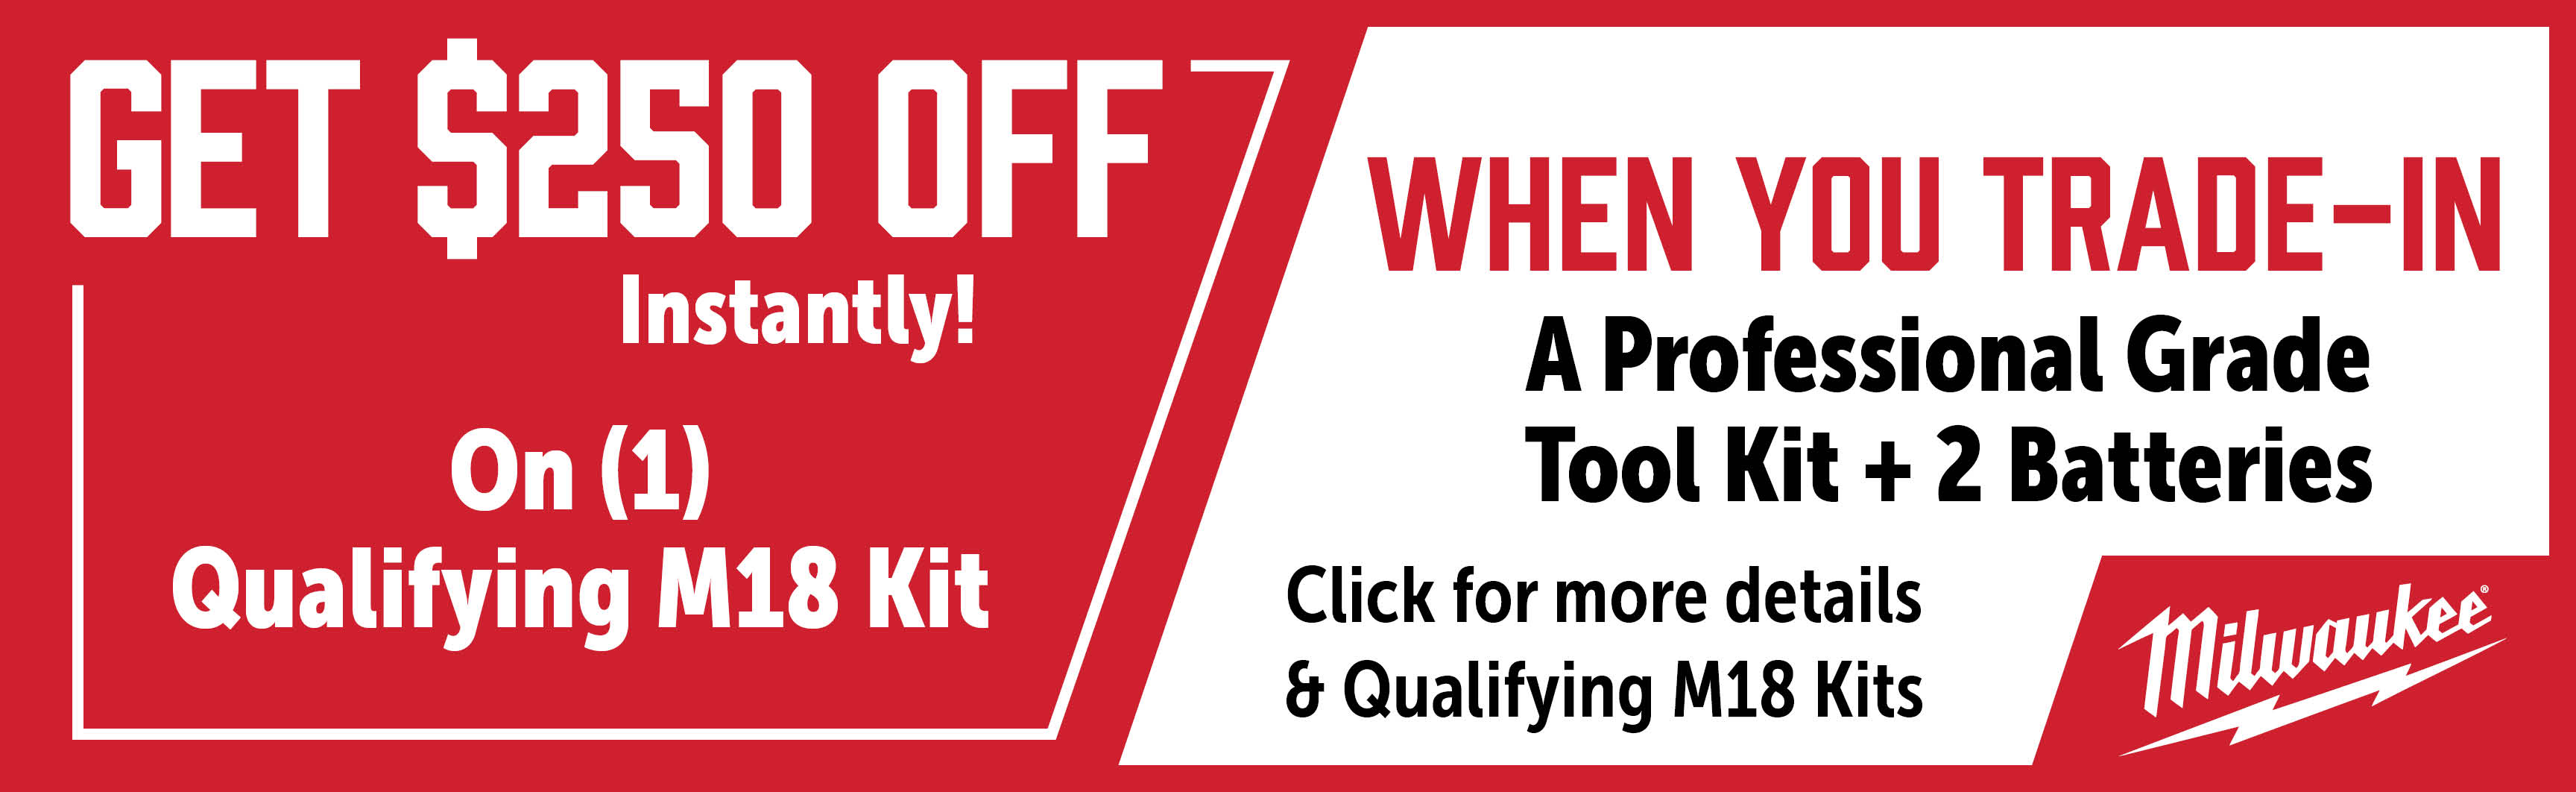 Milwaukee Aug-Oct: Buy a M286722 or M266022CT and Get $250 OFF when you Trade-In a Pro Grade Tool Kit & 2 Batteries